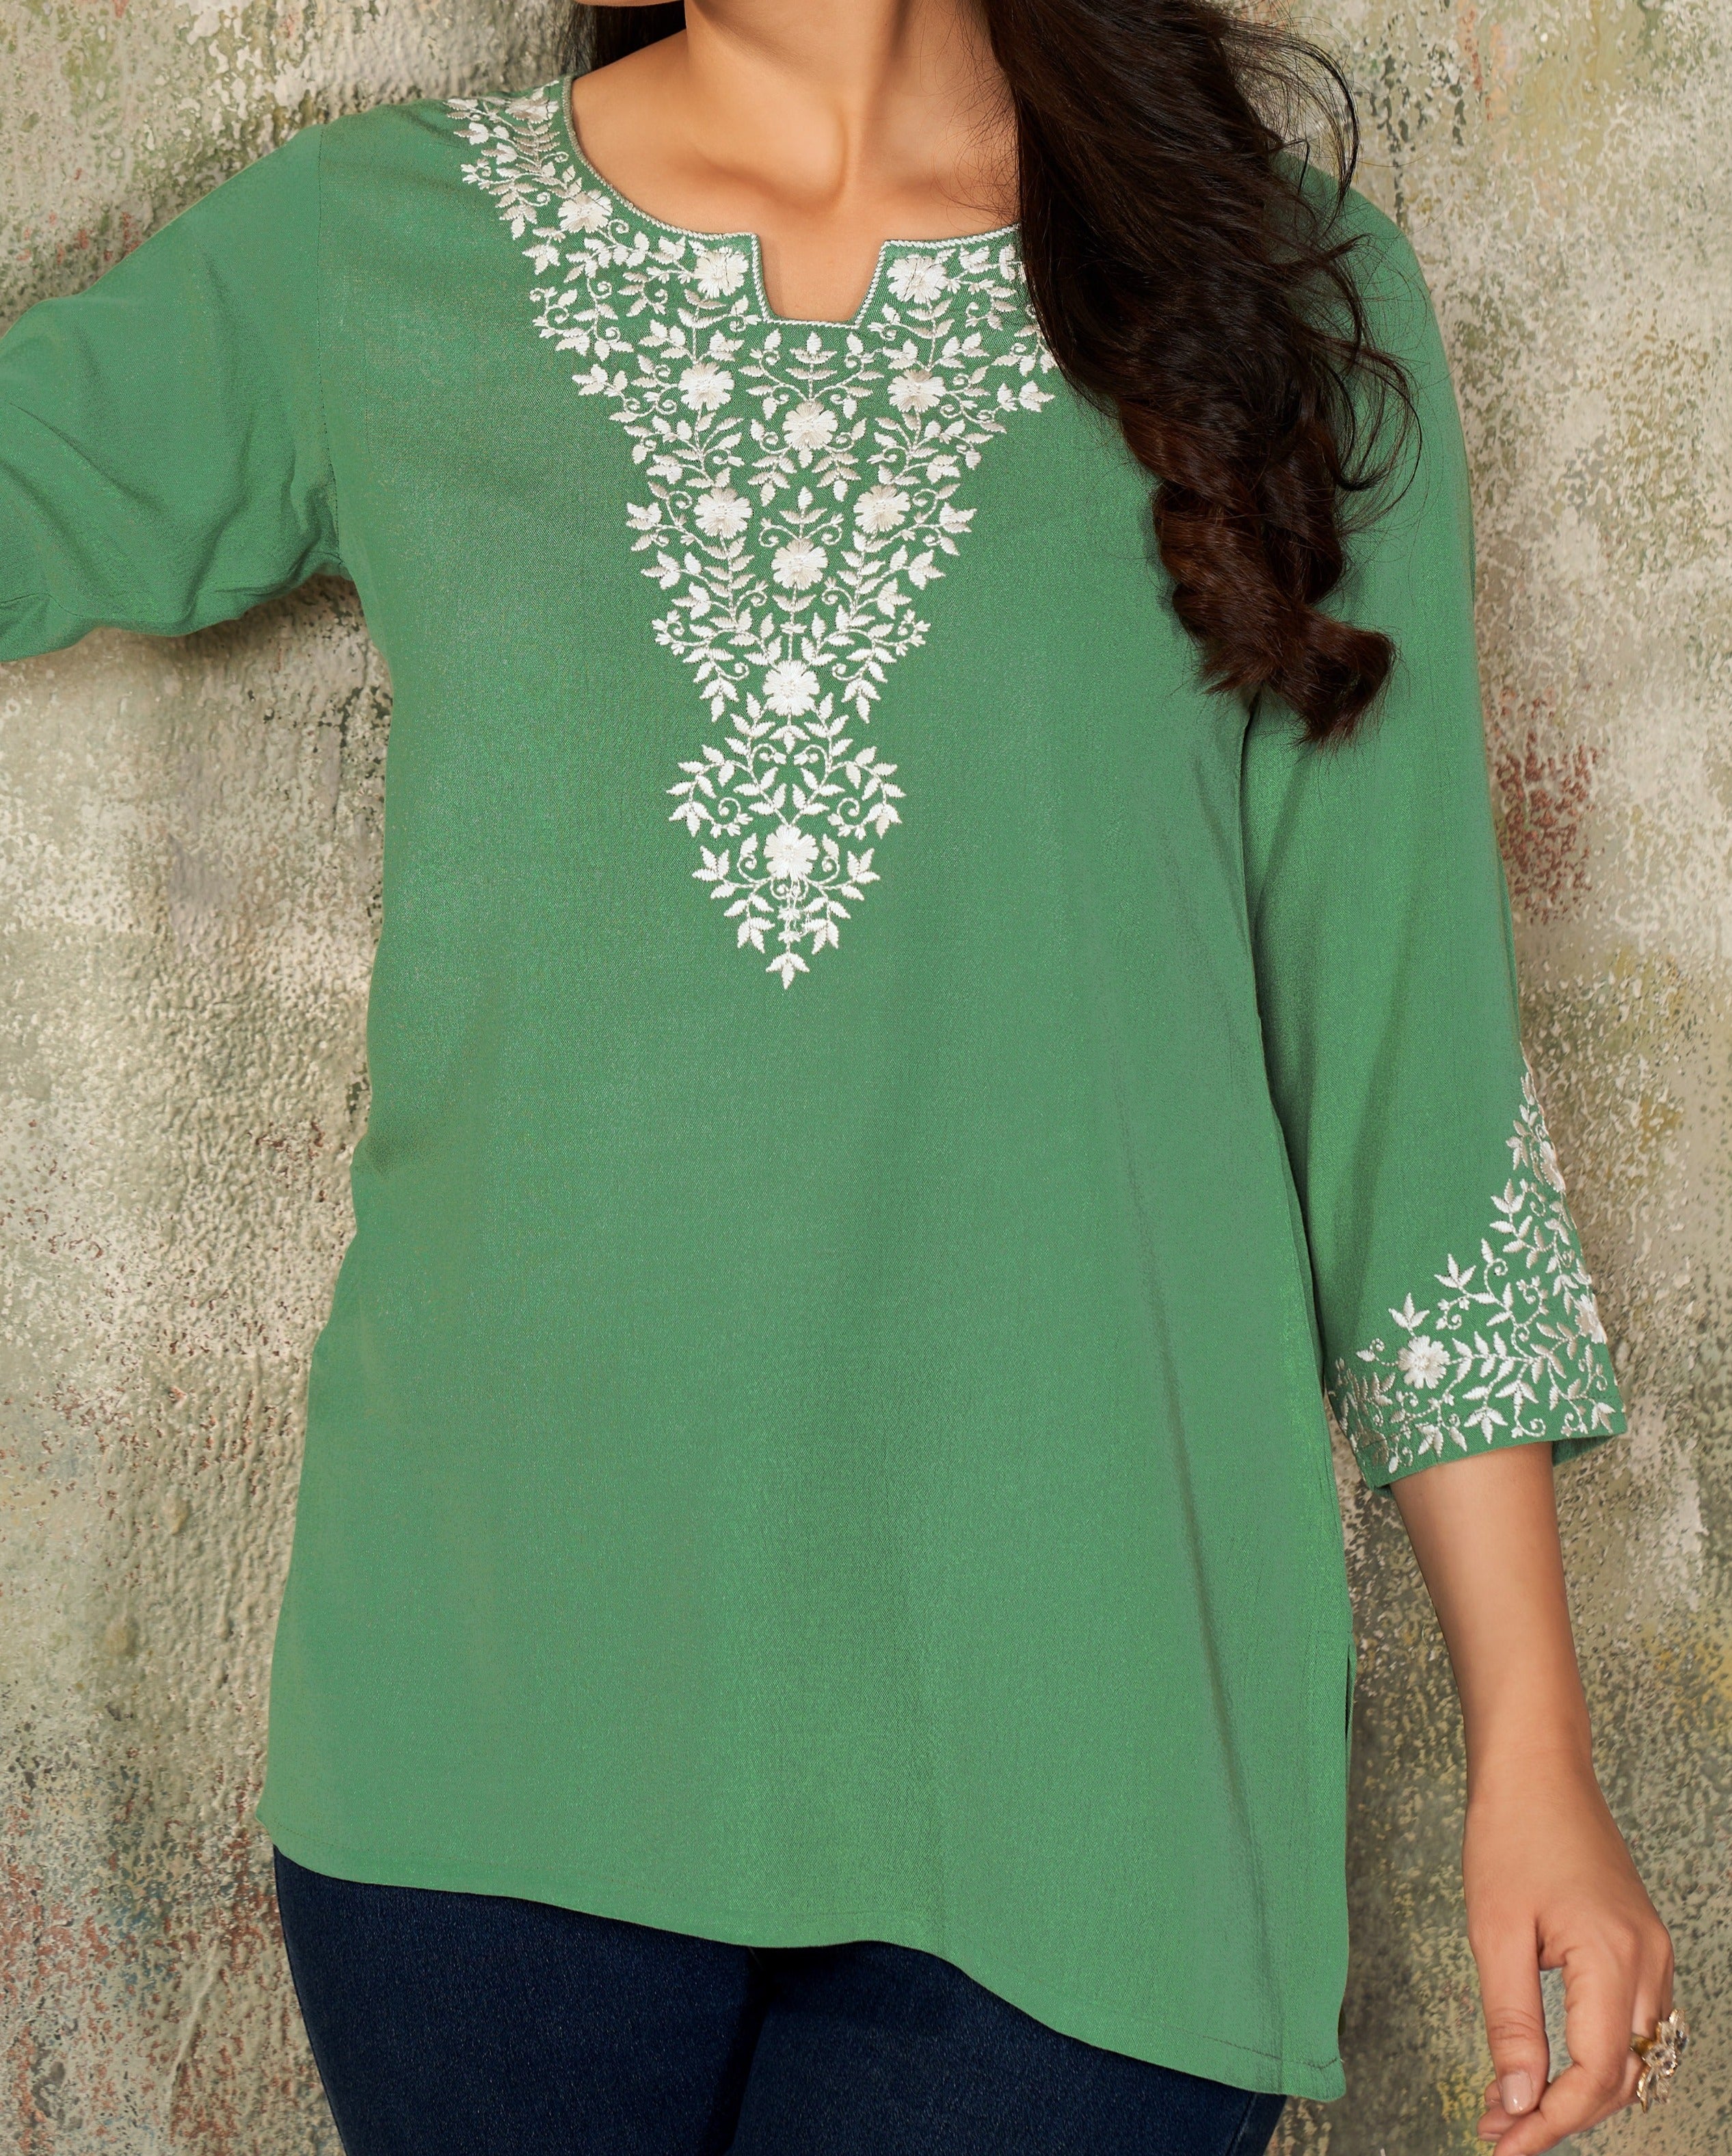 Embroidered Rayon Top